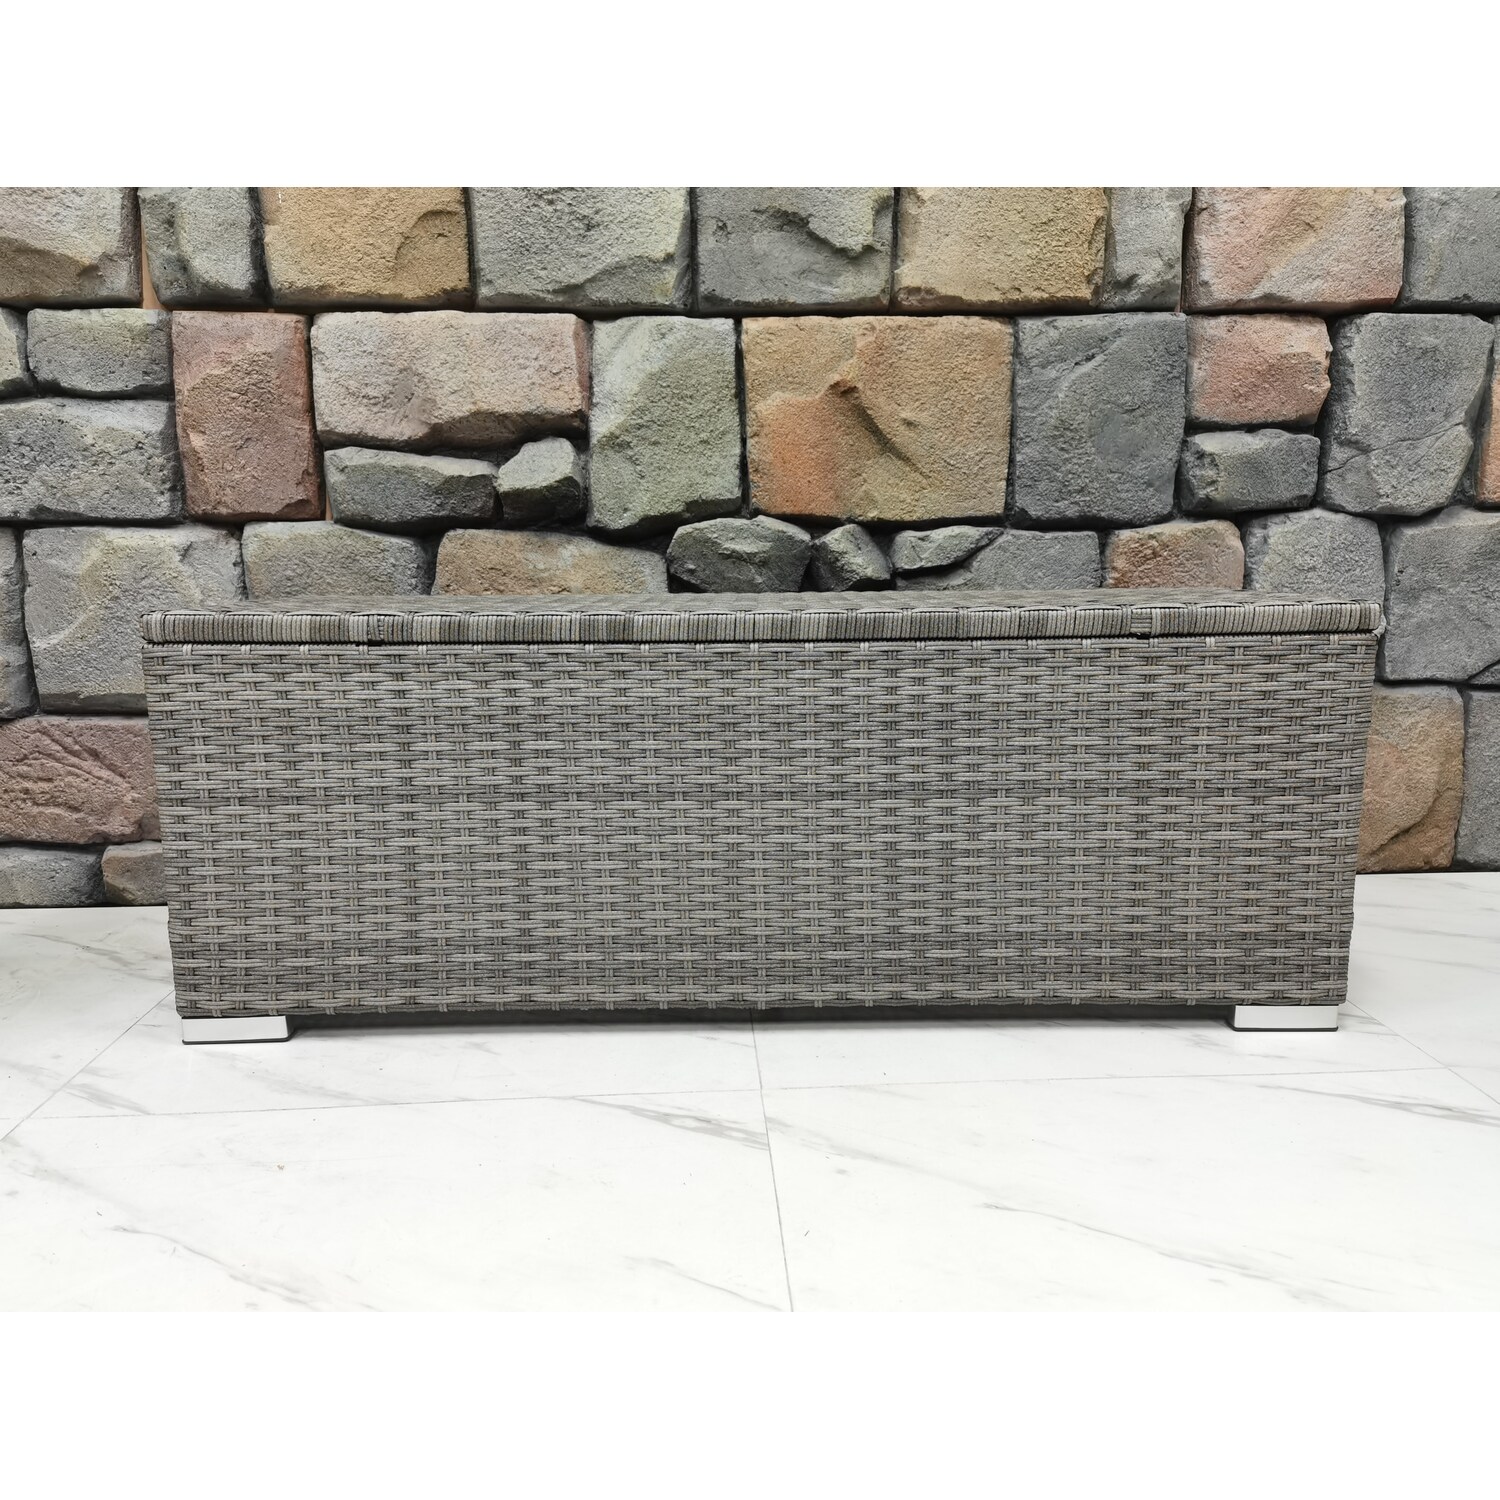 Malay Deluxe New Hampshire Grey Rattan Bench with Cushion Image 2